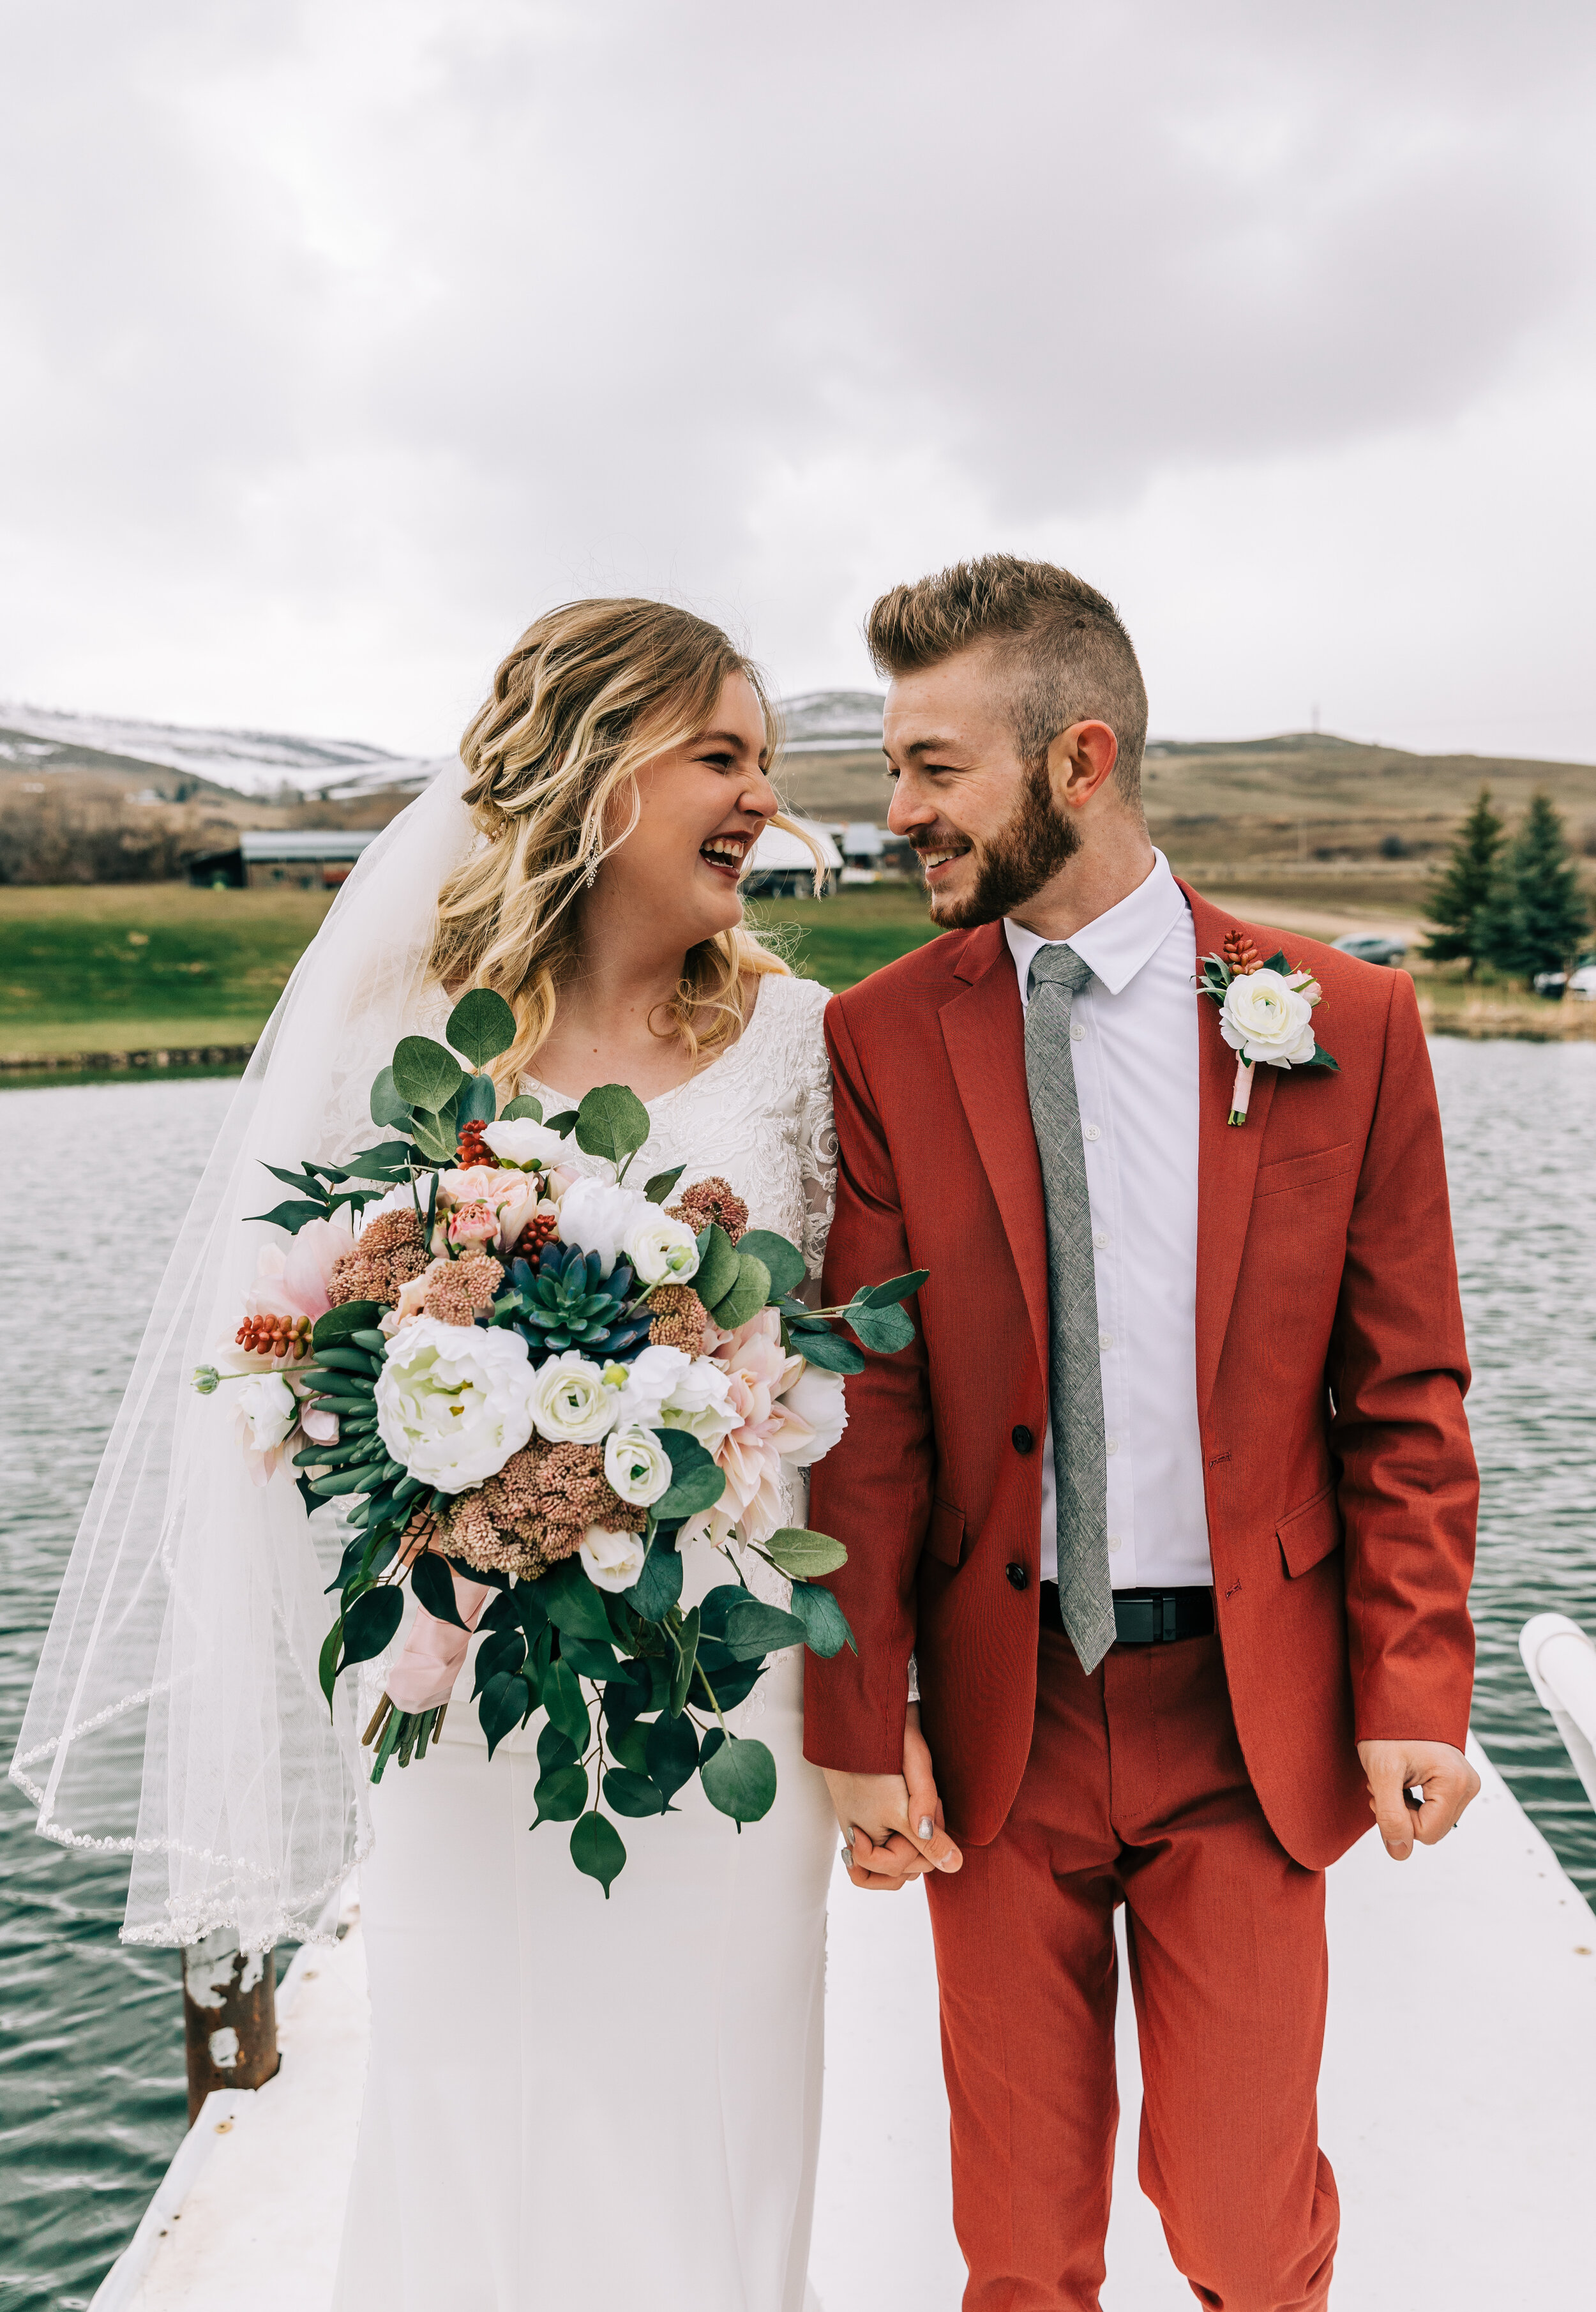  A couple standing on stormy waters in a beautiful outdoor elopement styled photo shoot in Preston, Idaho. Couple goals couple pose inspiration outdoor wedding elopement photographer unique rustic wedding aesthetic inspiration wedding goals Bella Ald